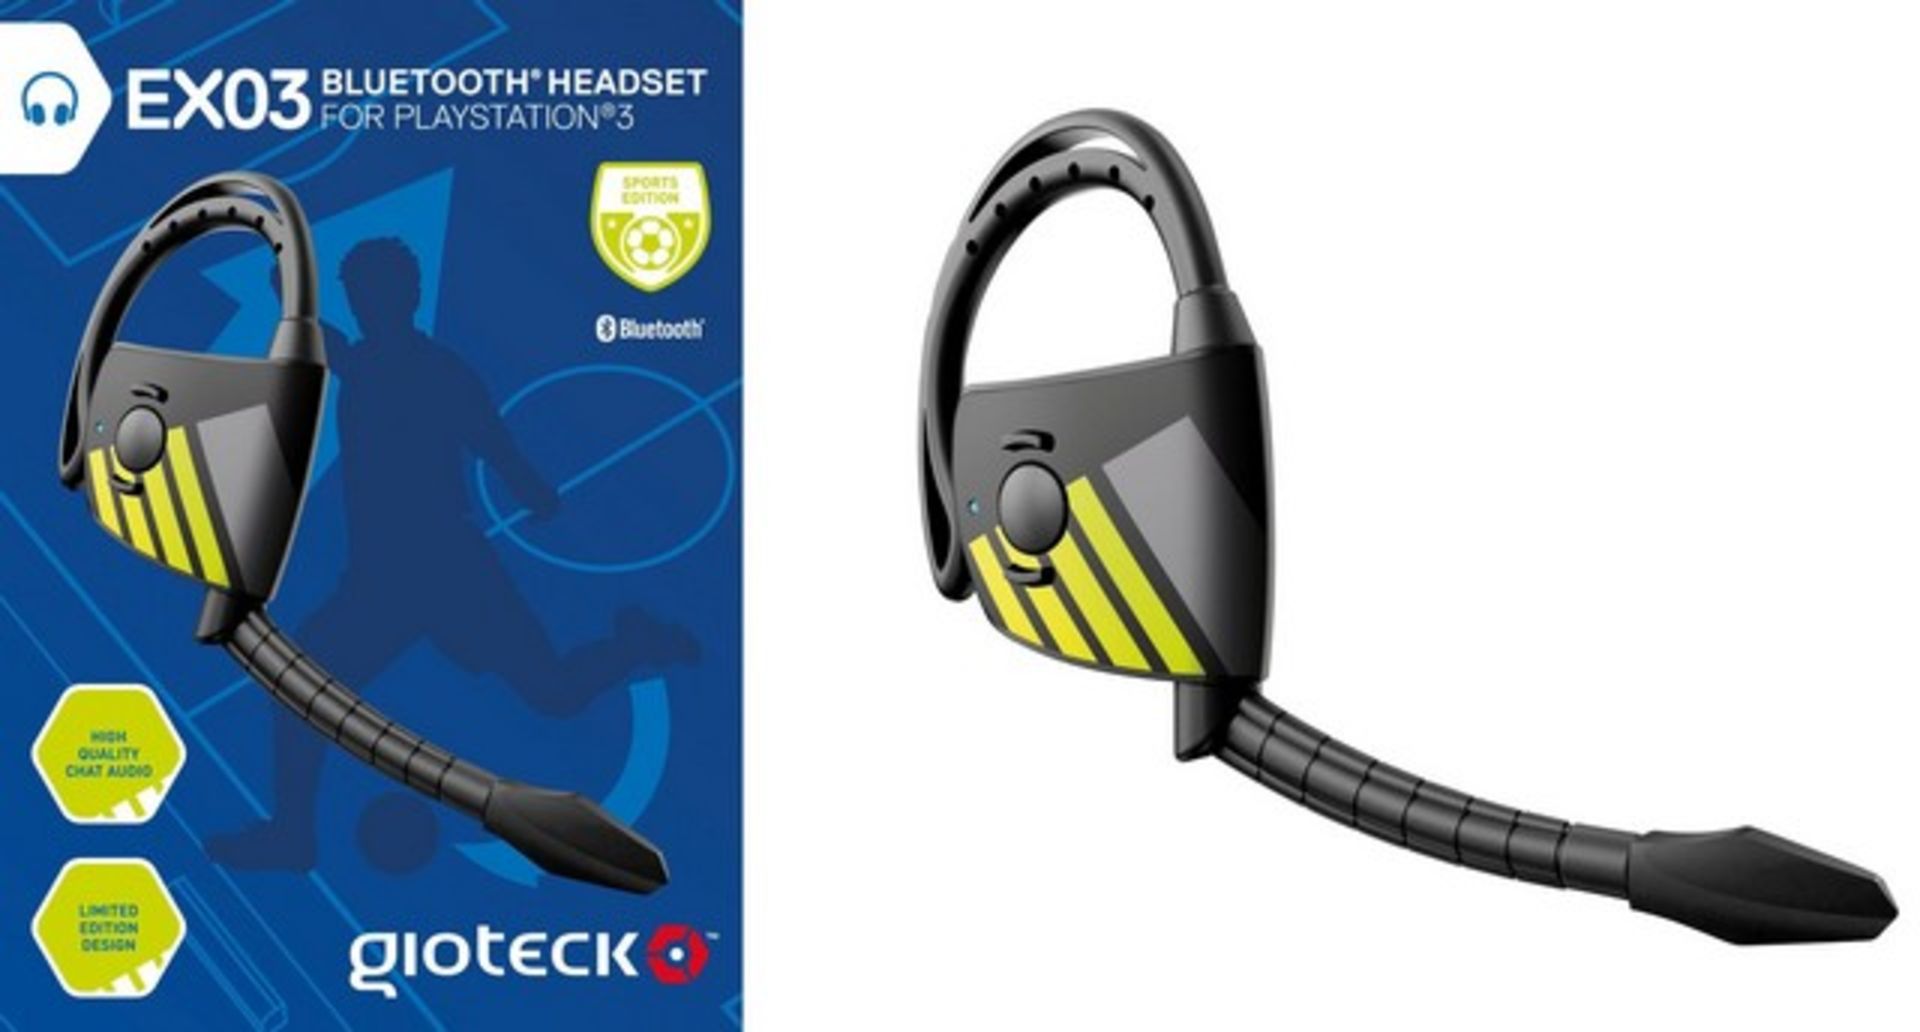 V Brand New Gioteck EX03 Bluetooth Gaming Headset For Playsation 3 - Limited Edition Design - Sports